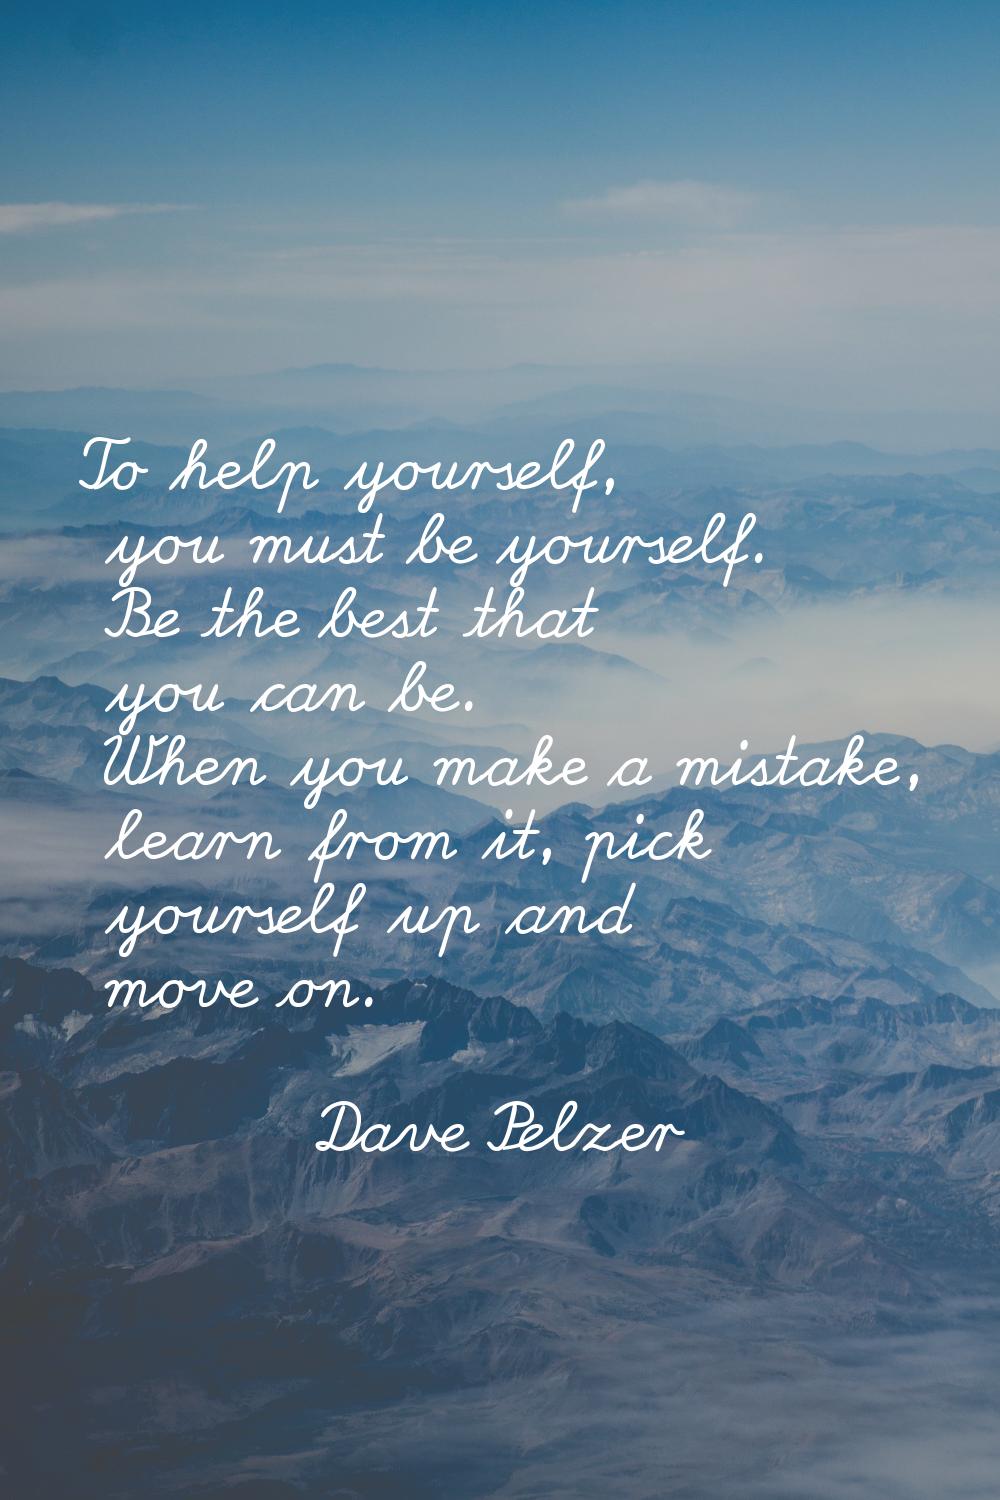 To help yourself, you must be yourself. Be the best that you can be. When you make a mistake, learn